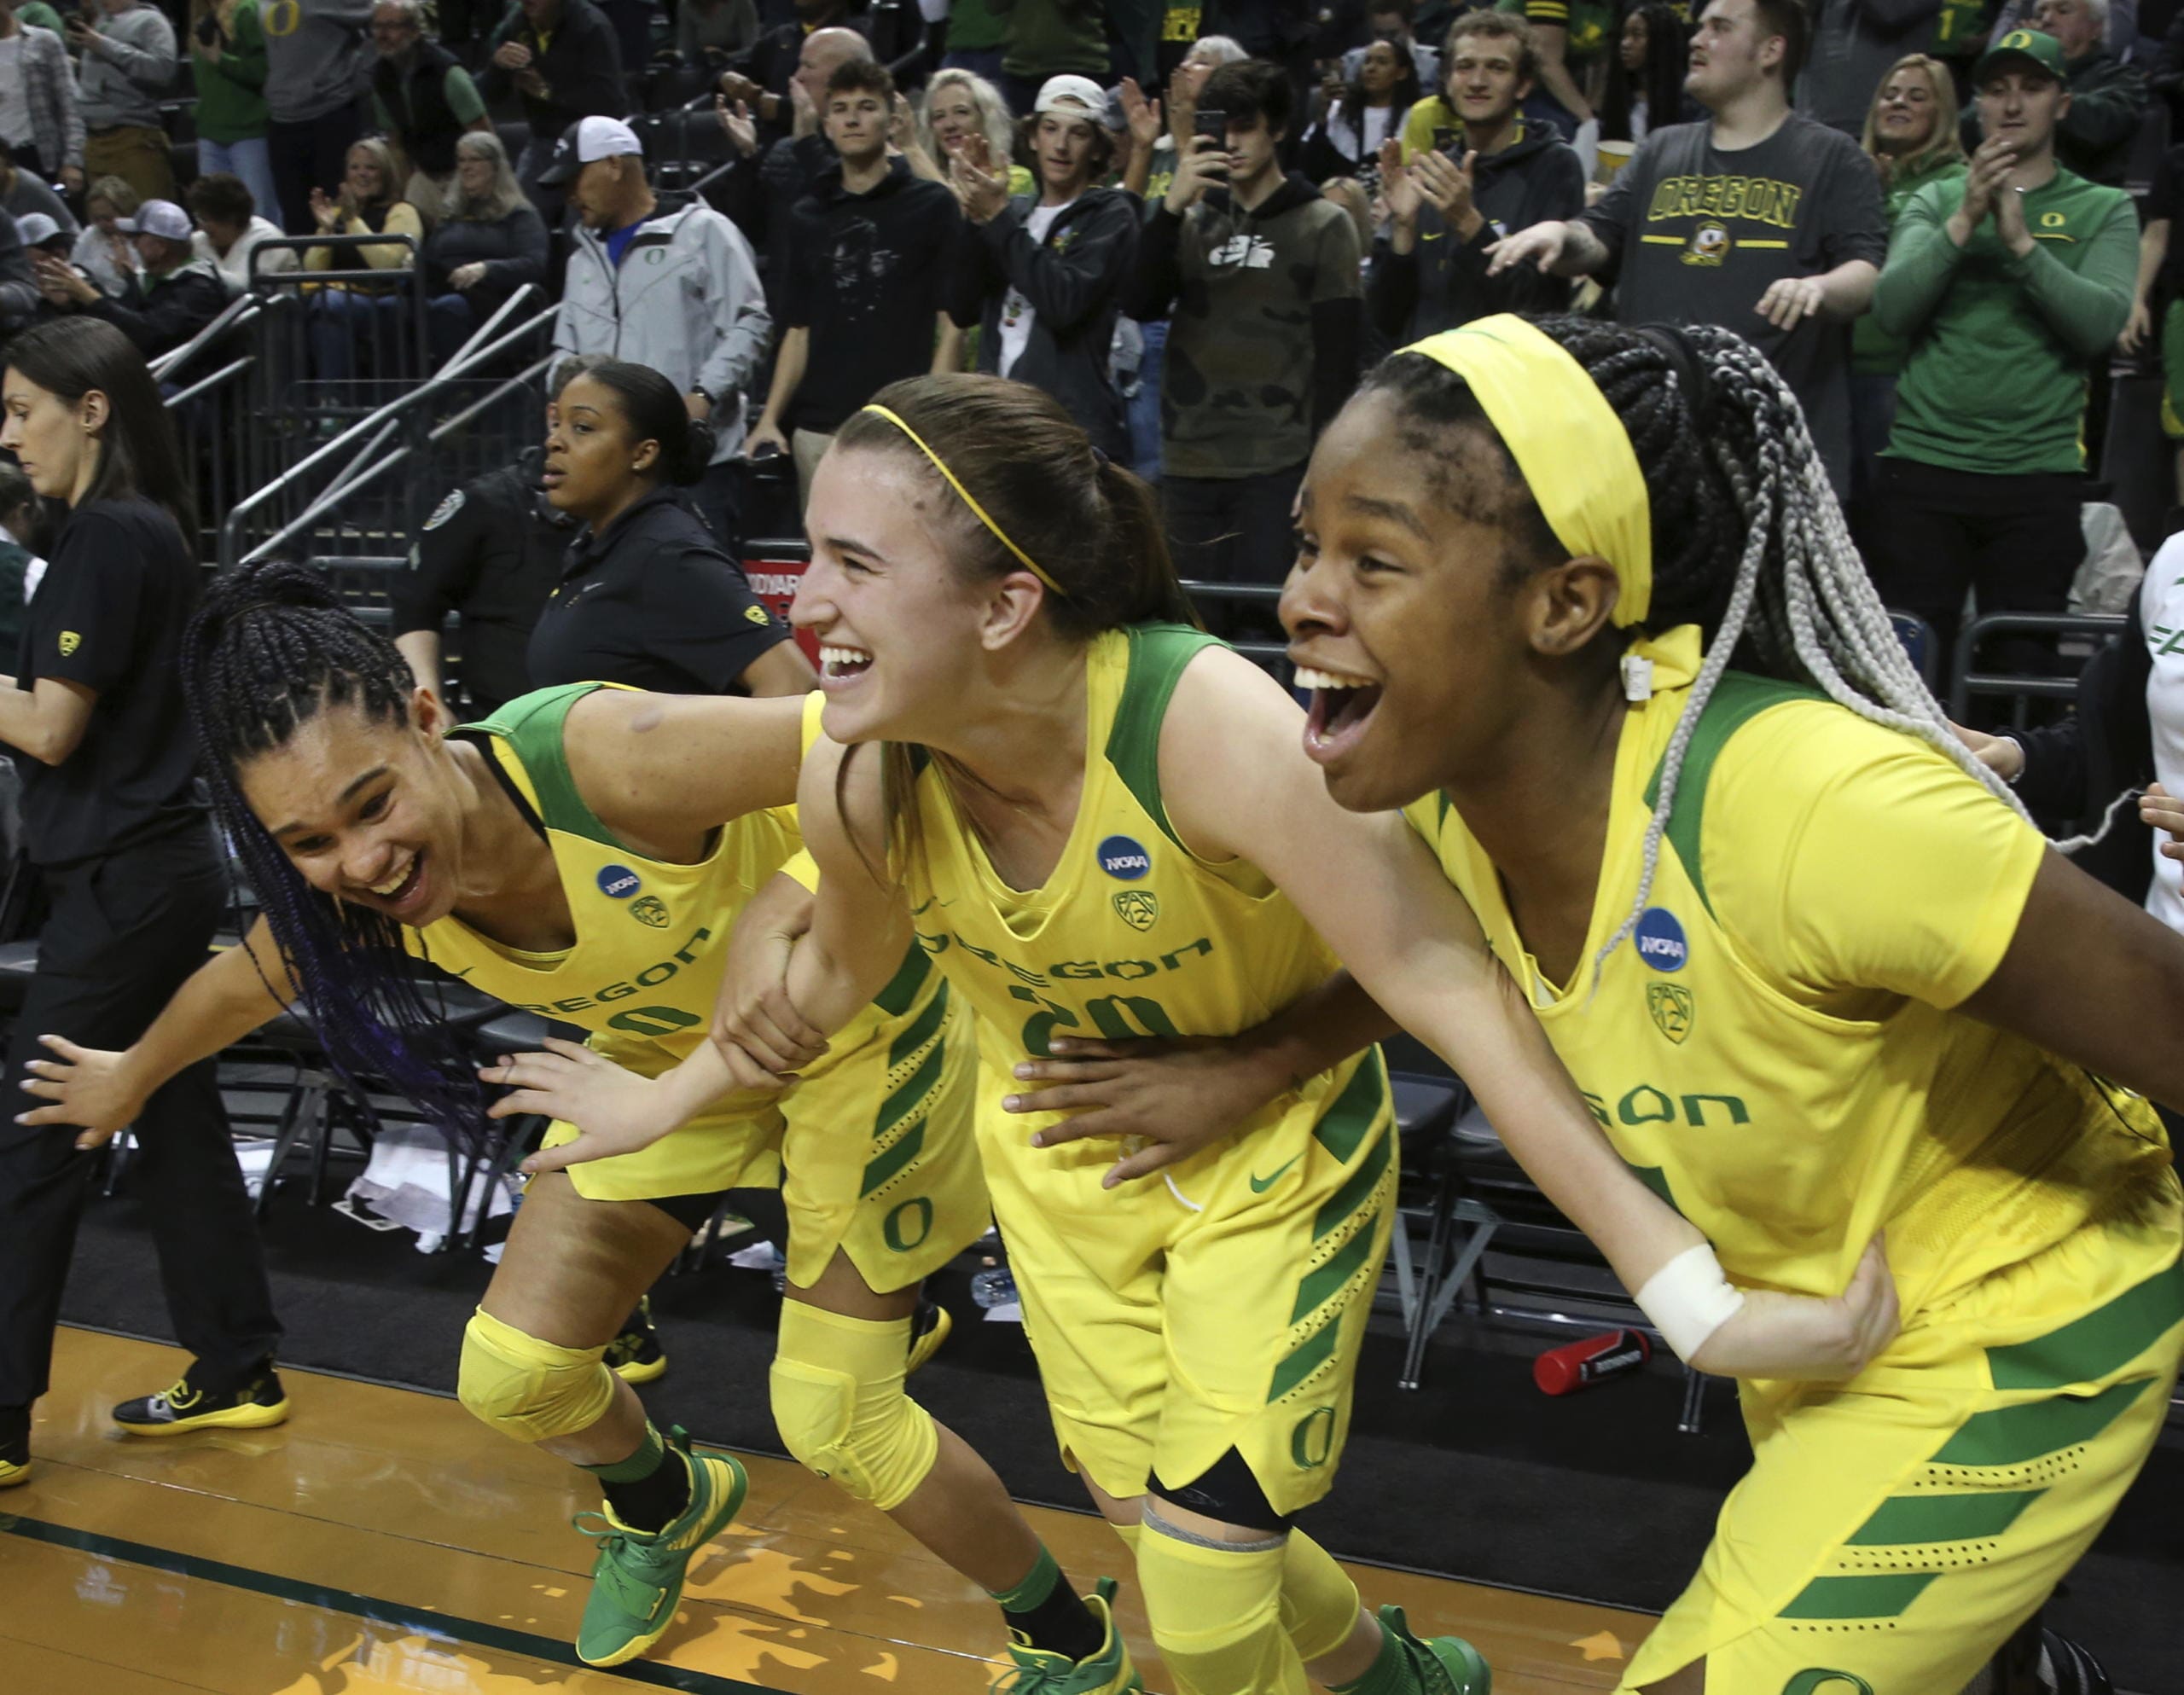 Oregon's Satou Sabally, left, Sabrina Ionescu and Ruthy Hebard, right, were all top-8 first-round picks in the WNBA draft on Friday, April 17, 2020.